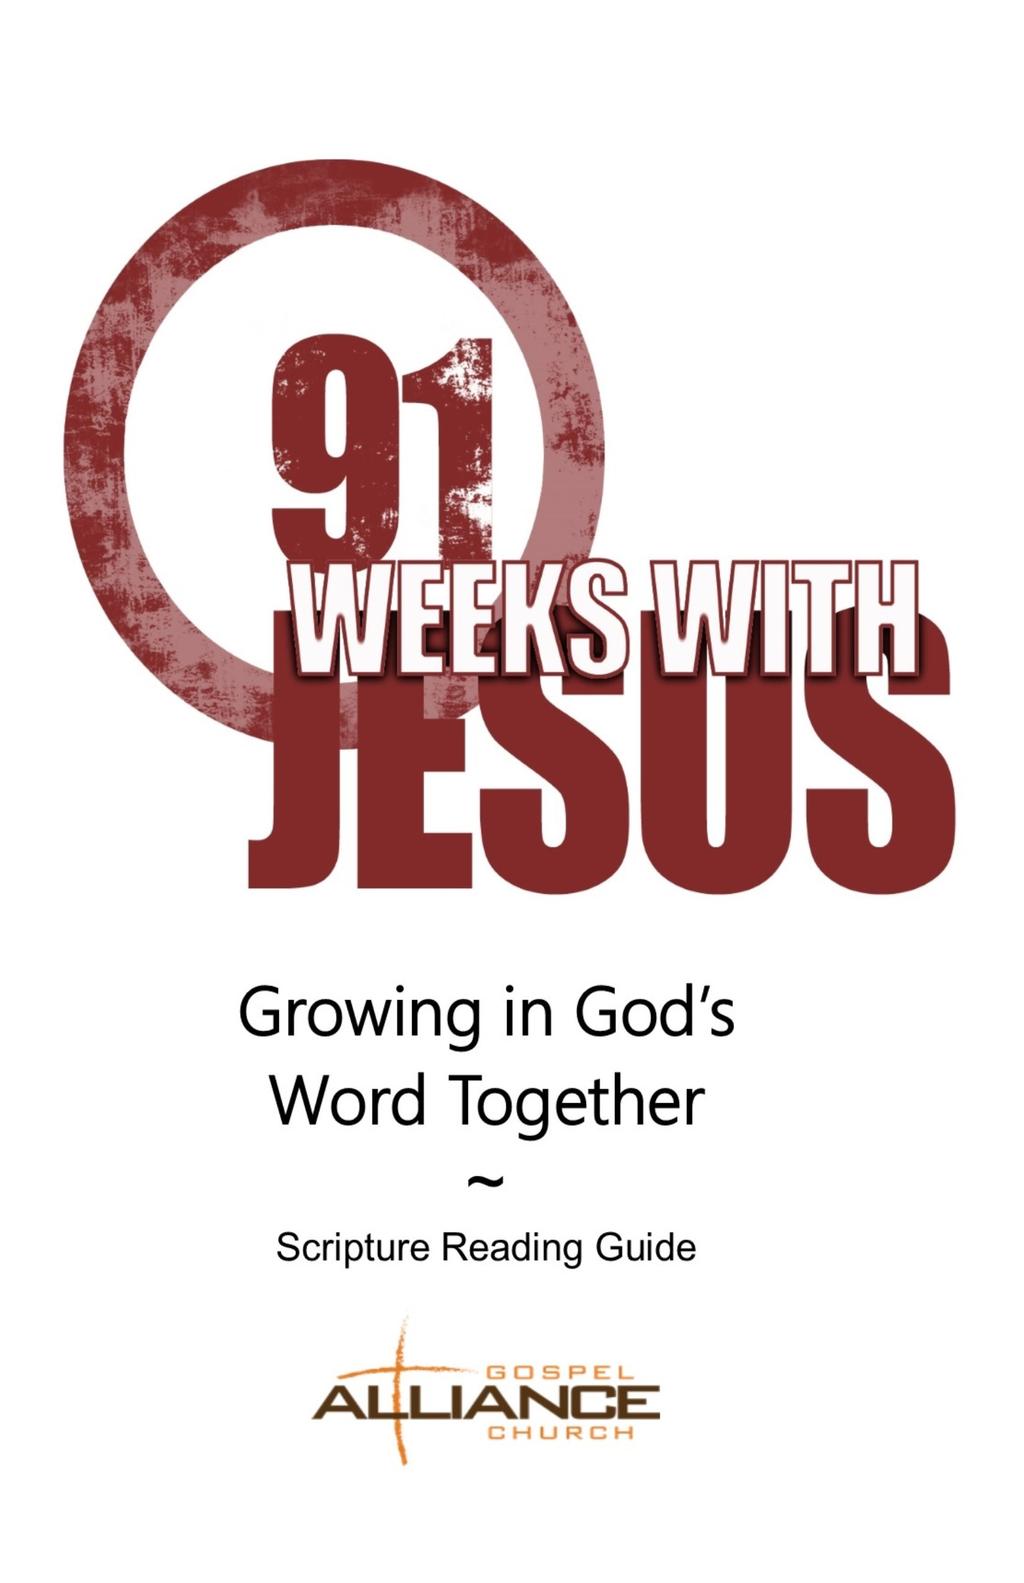 P A G E 2 It s never too late to join us! 91 Weeks With Jesus Growing in God s Word Together We, as a congregation, have already commenced on our unprecedented 91 Weeks With Jesus journey together.